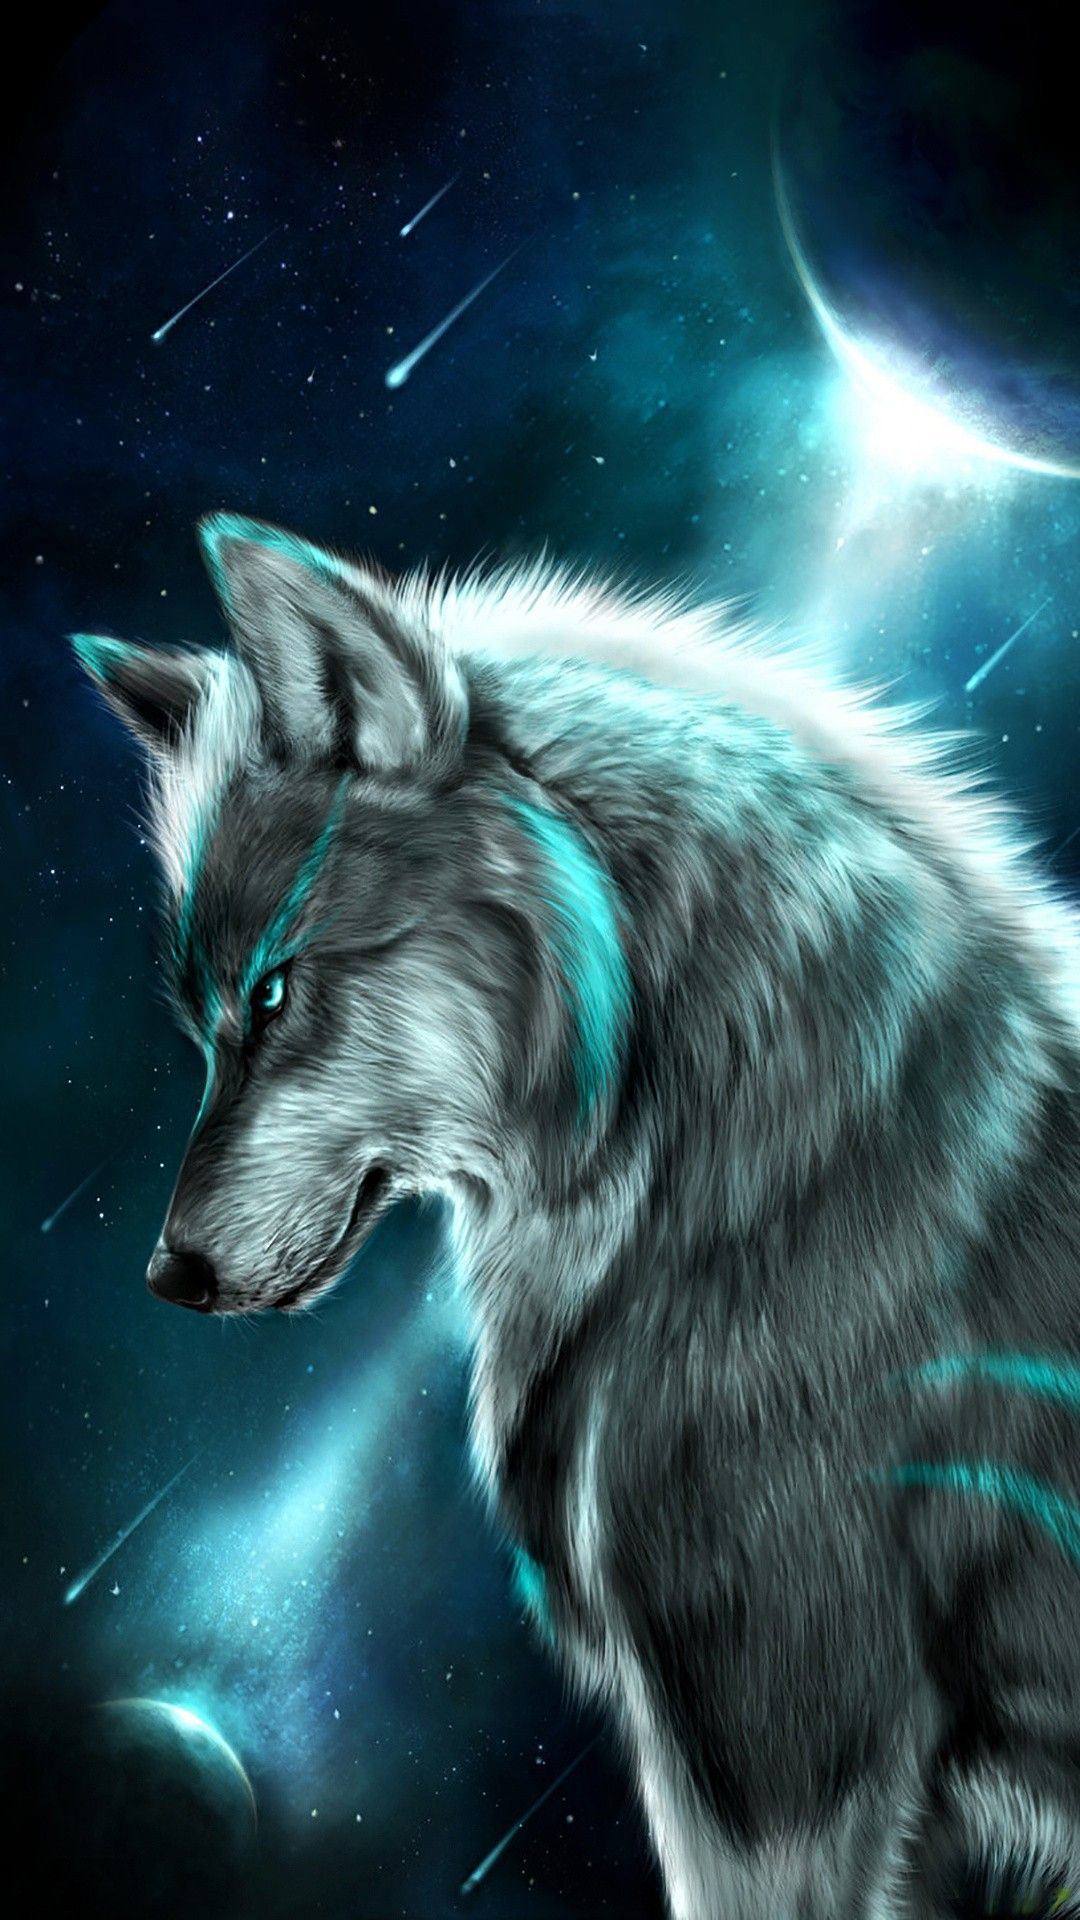 Epic Wolf Wallpaper Hupages Download iPhone Wallpaper. Wolf wallpaper, Wolf image, Wolf spirit animal